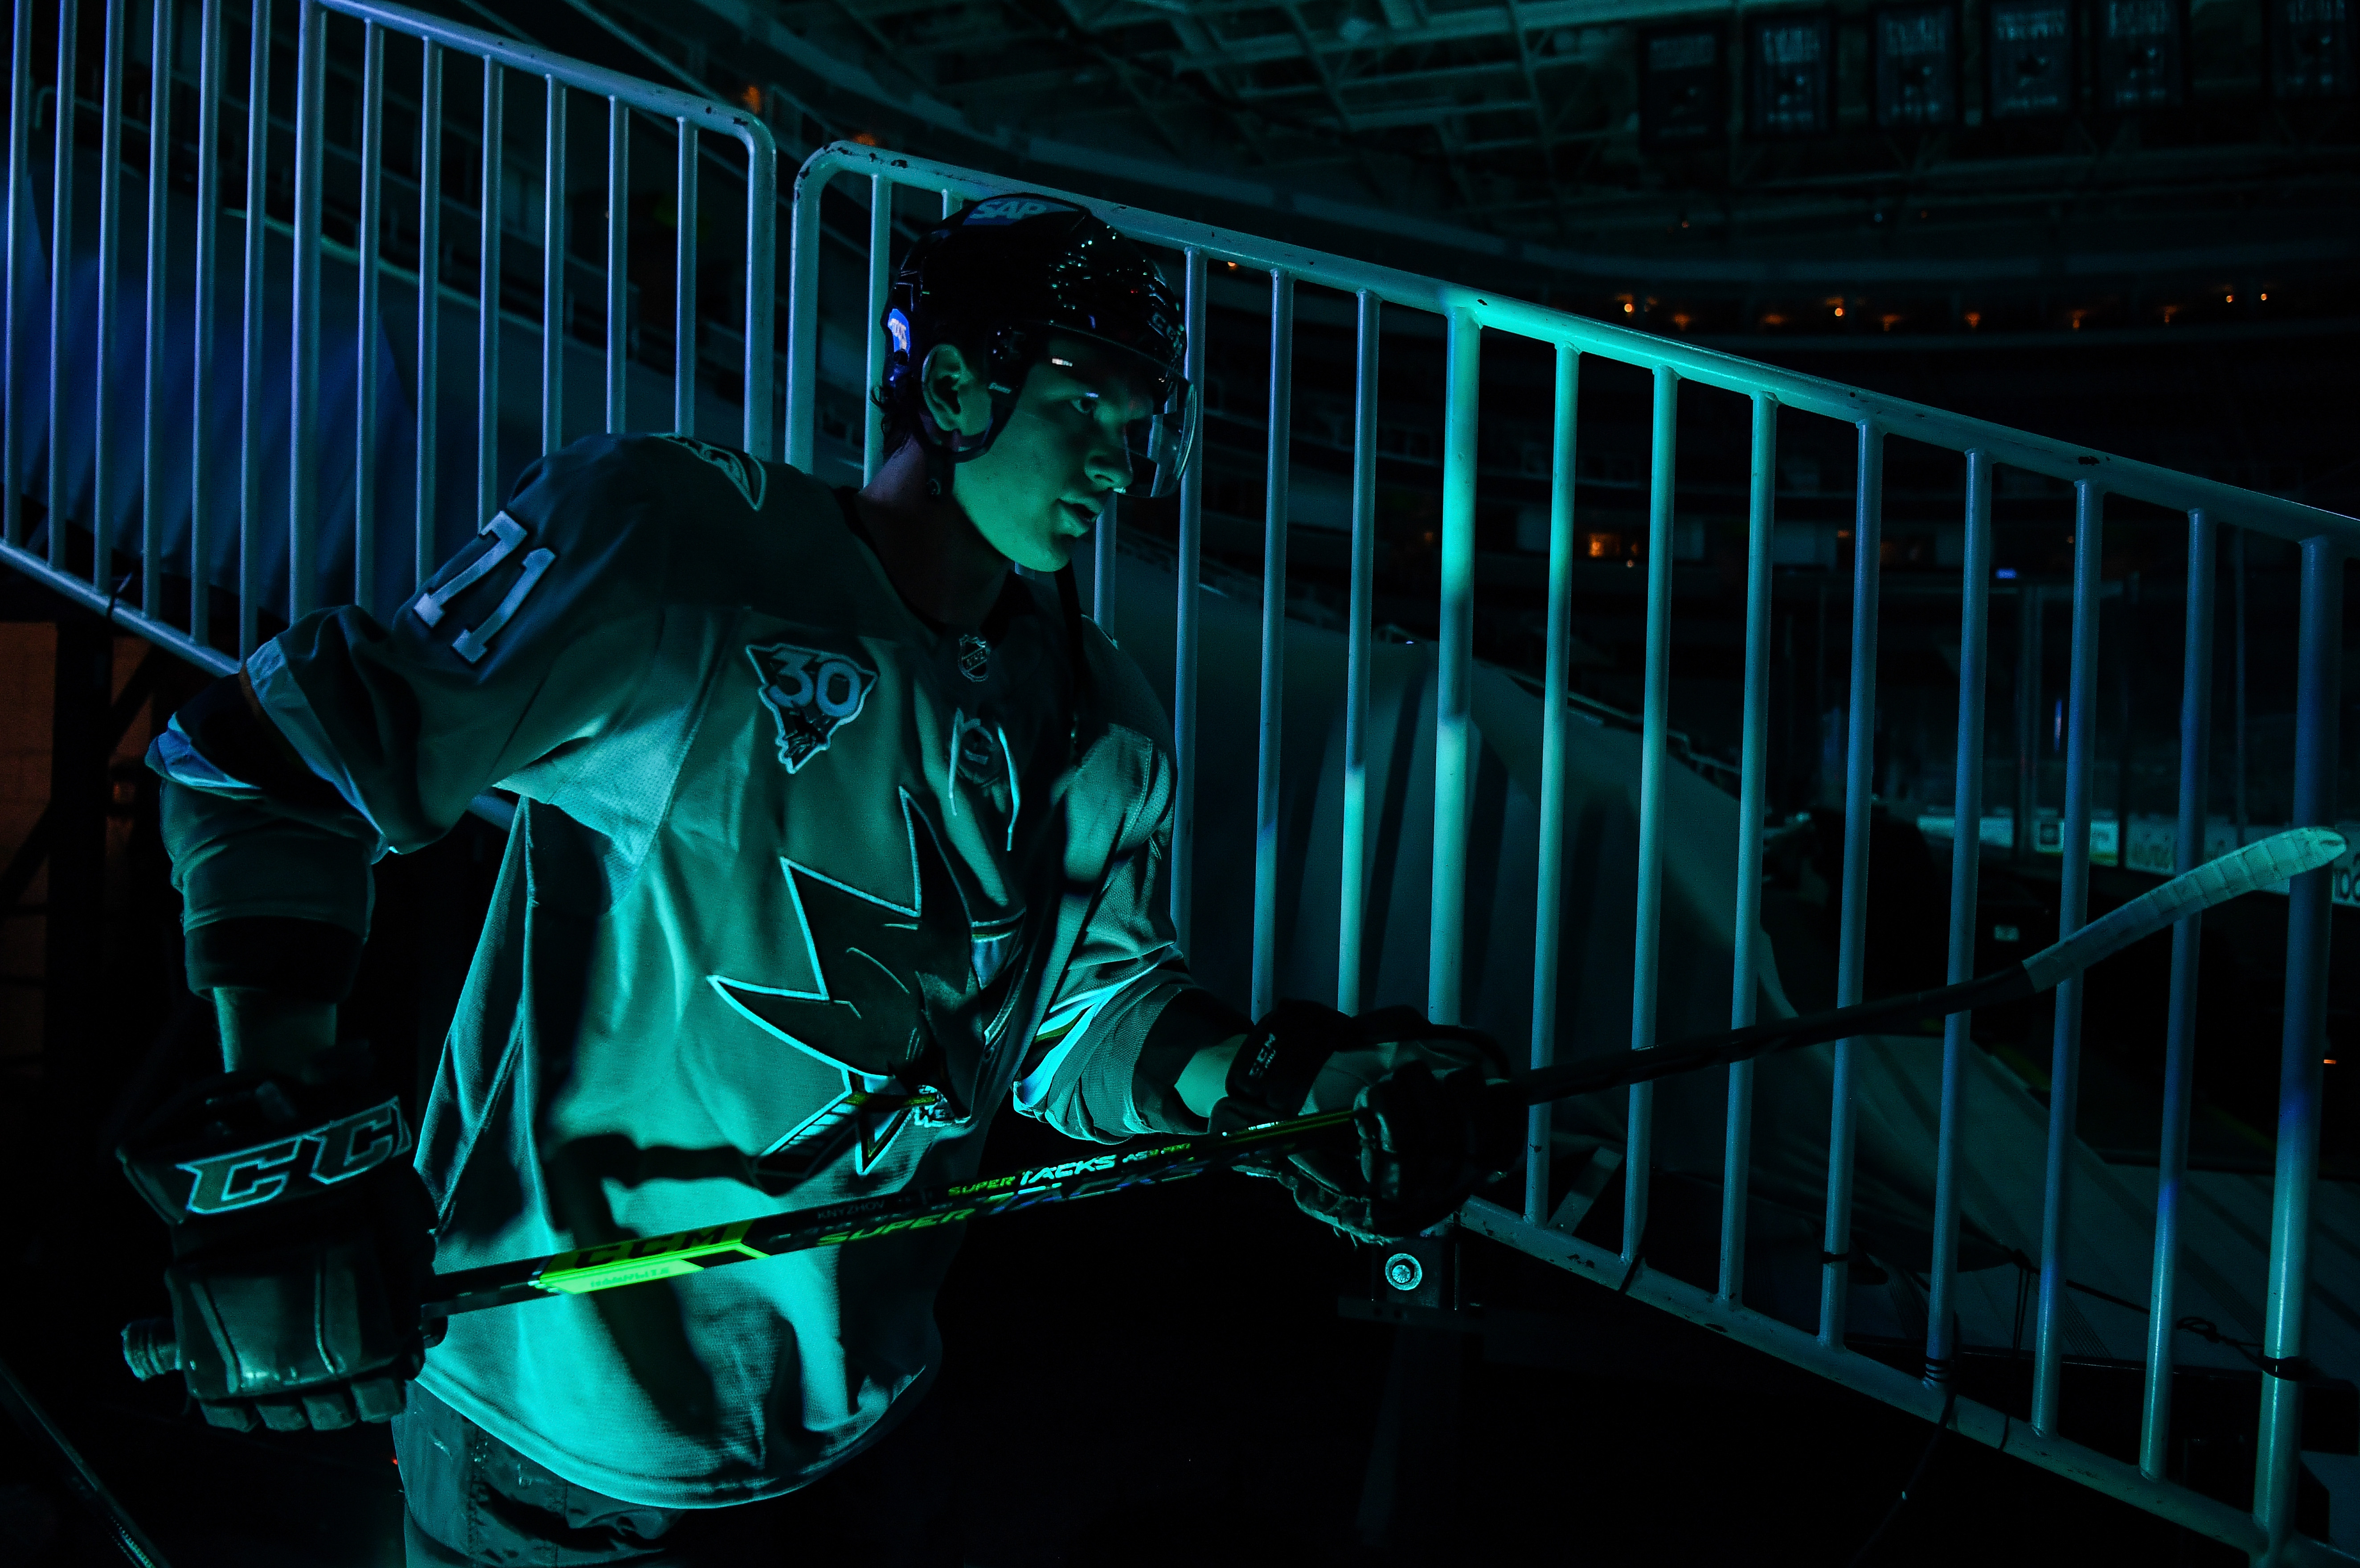 Nikolai Knyzhov #71 of the San Jose Sharks walks out onto the ice before facing the Anaheim Ducks at SAP Center on April 14, 2021 in San Jose, California.